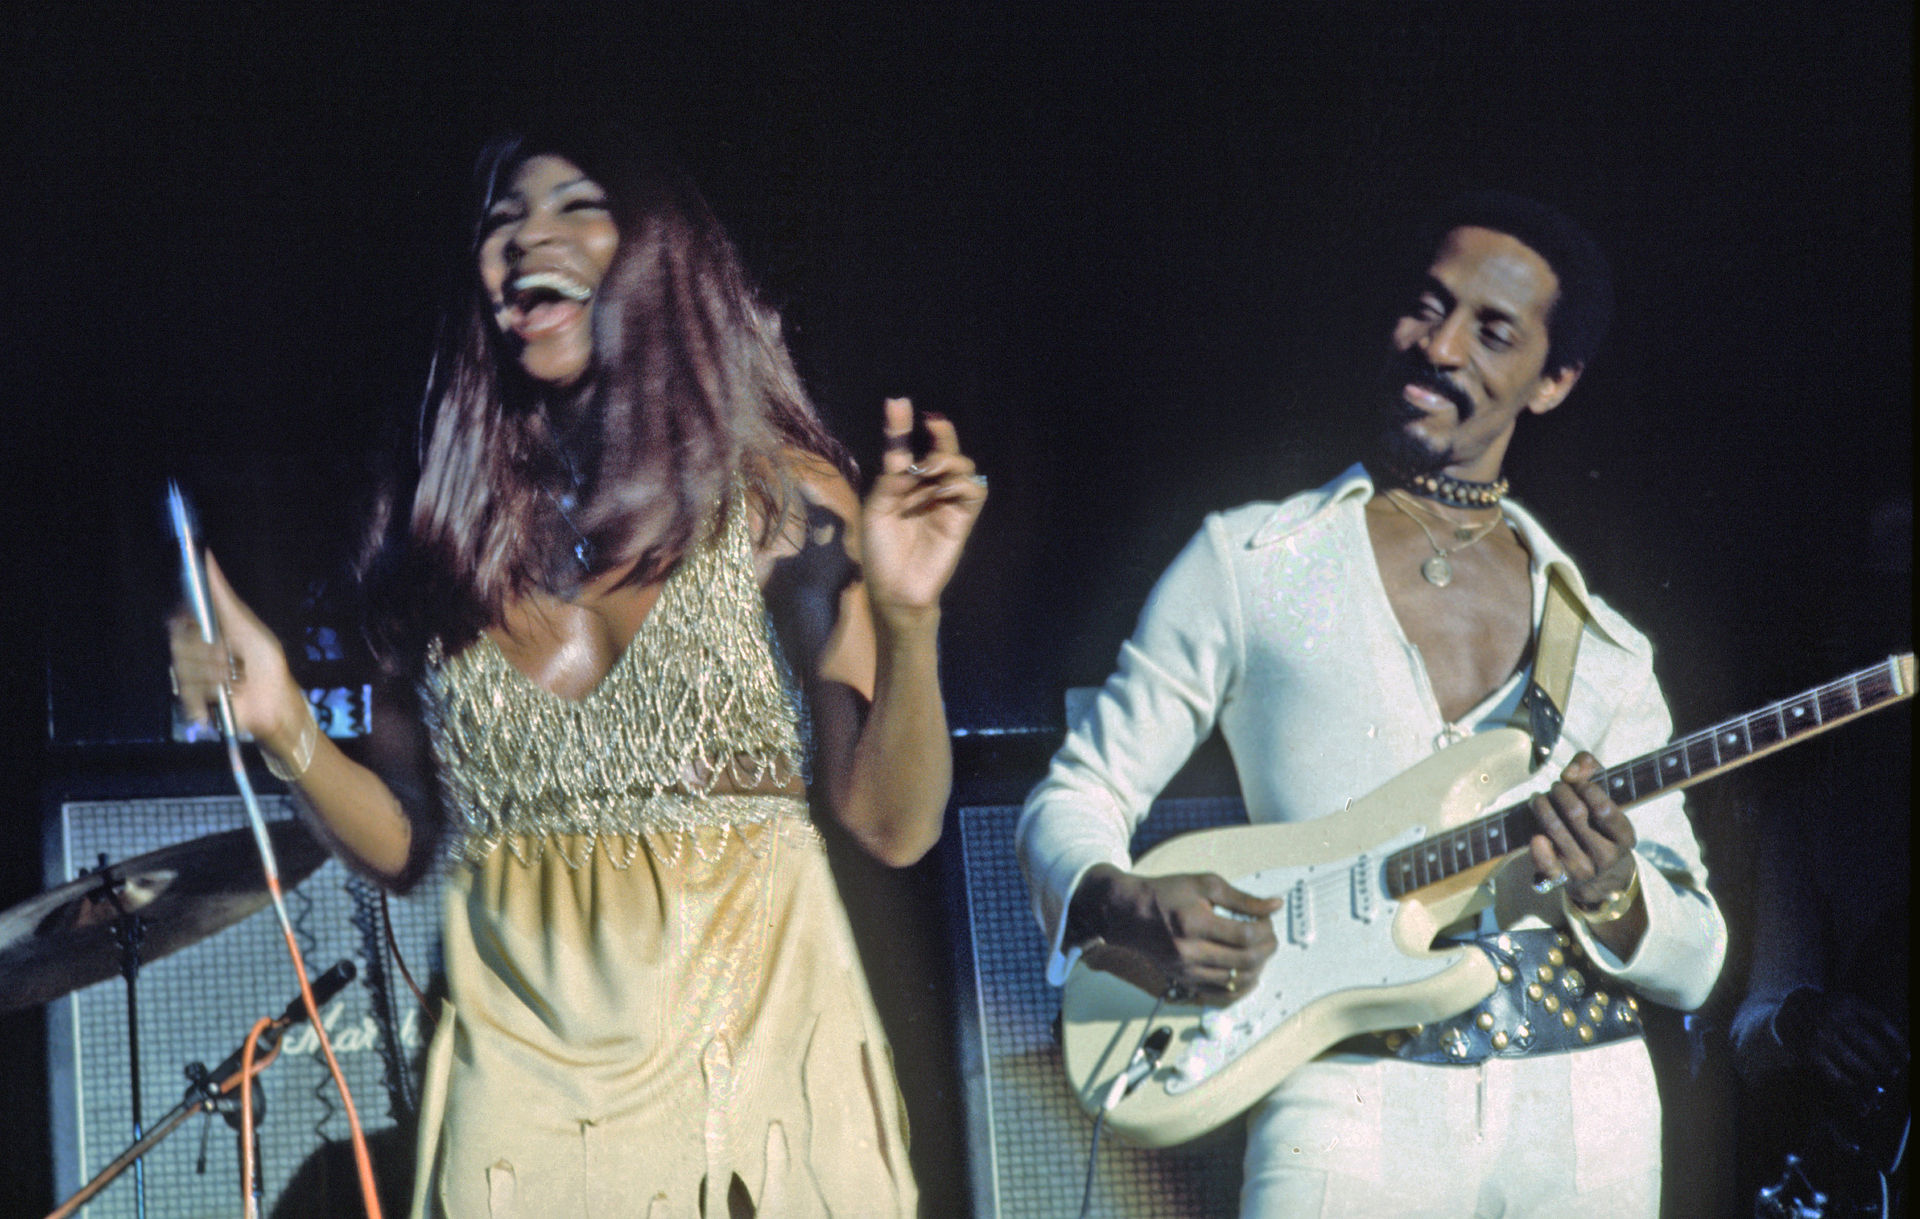 tina turner ike turner - Heinrich Klaffs - originally posted to Flickr as Ike & Tina Turner 231172_Dia14, CC BY-SA 2.0, https://commons.wikimedia.org/w/index.php?curid=12311964